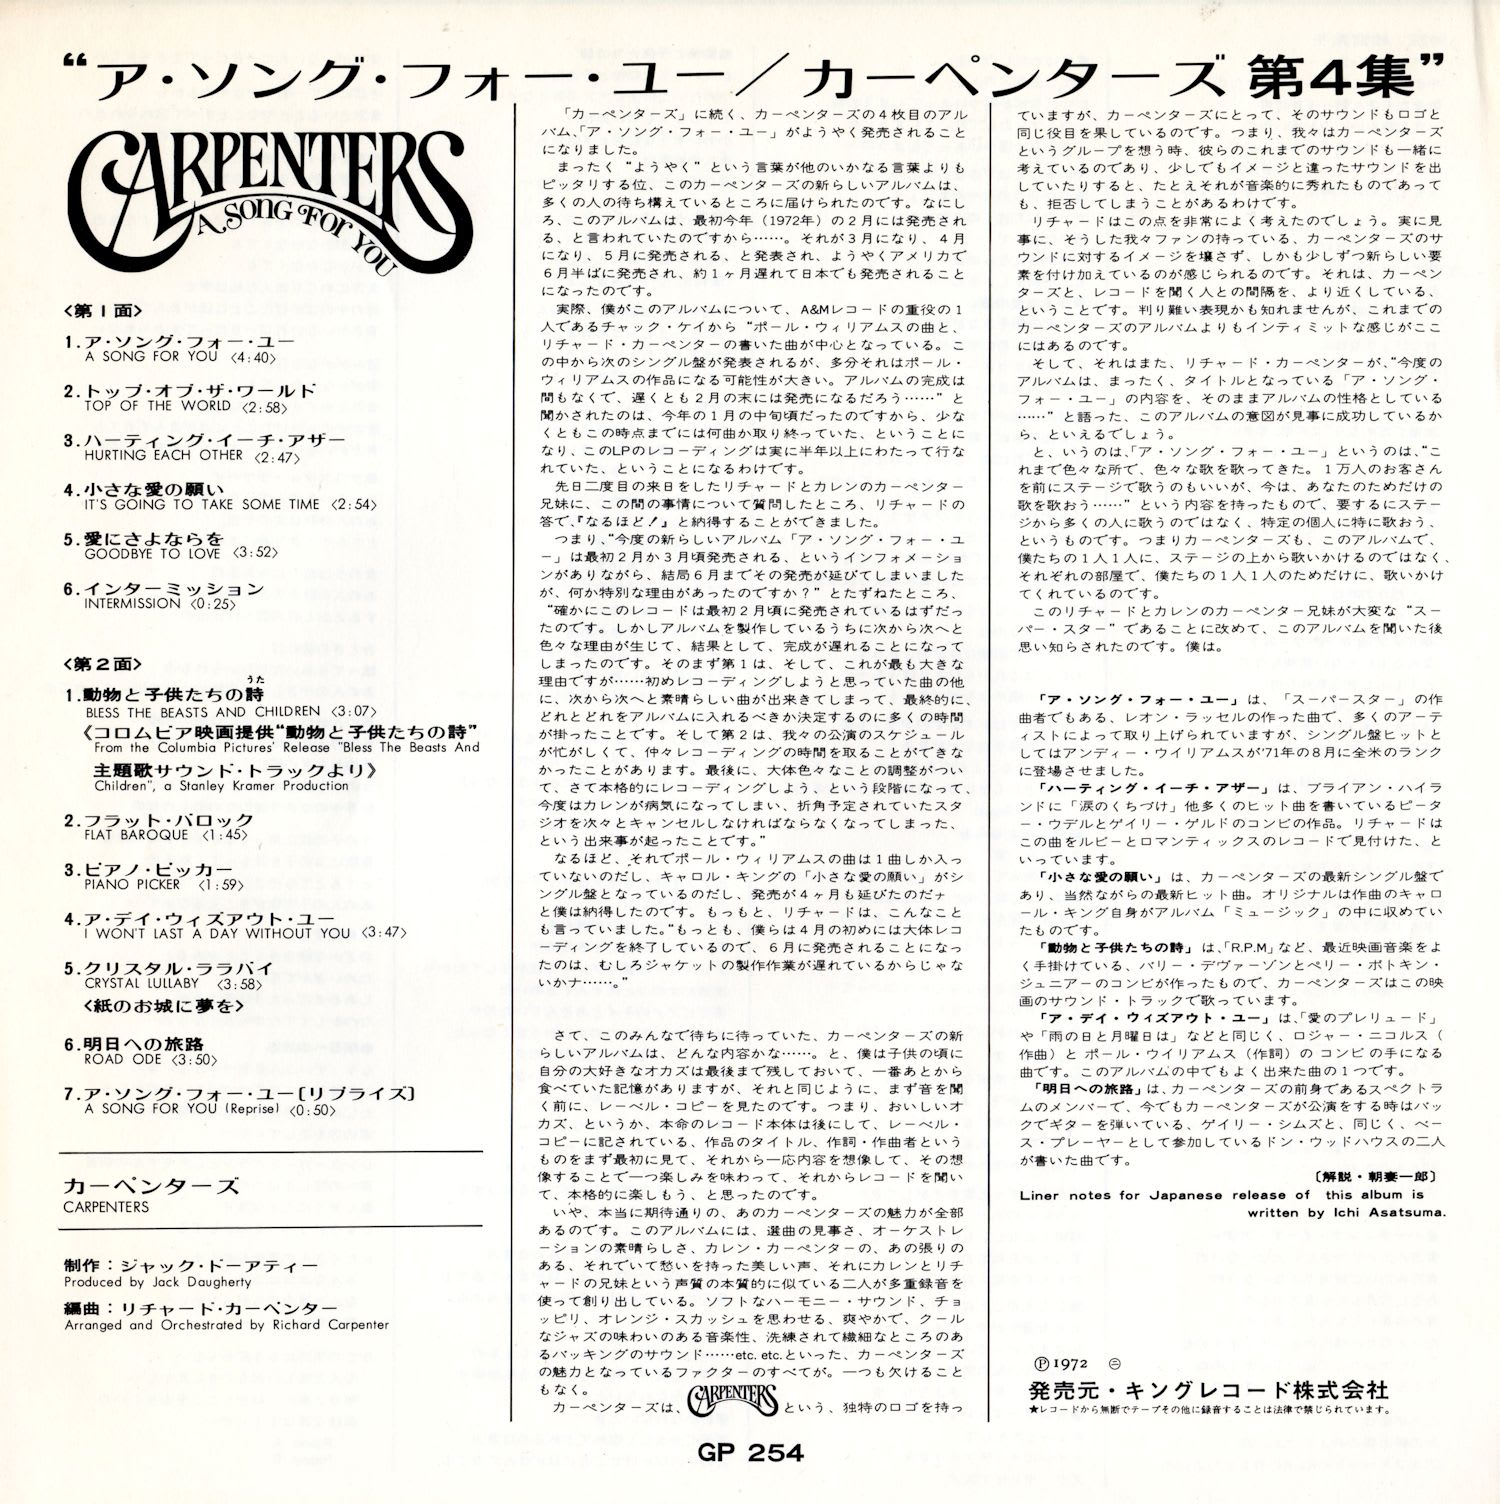 A Song For You / Carpenters ア・ソング・フォー・ユー／カーペンターズ - 昔懐かしい音楽情報をお届けします。